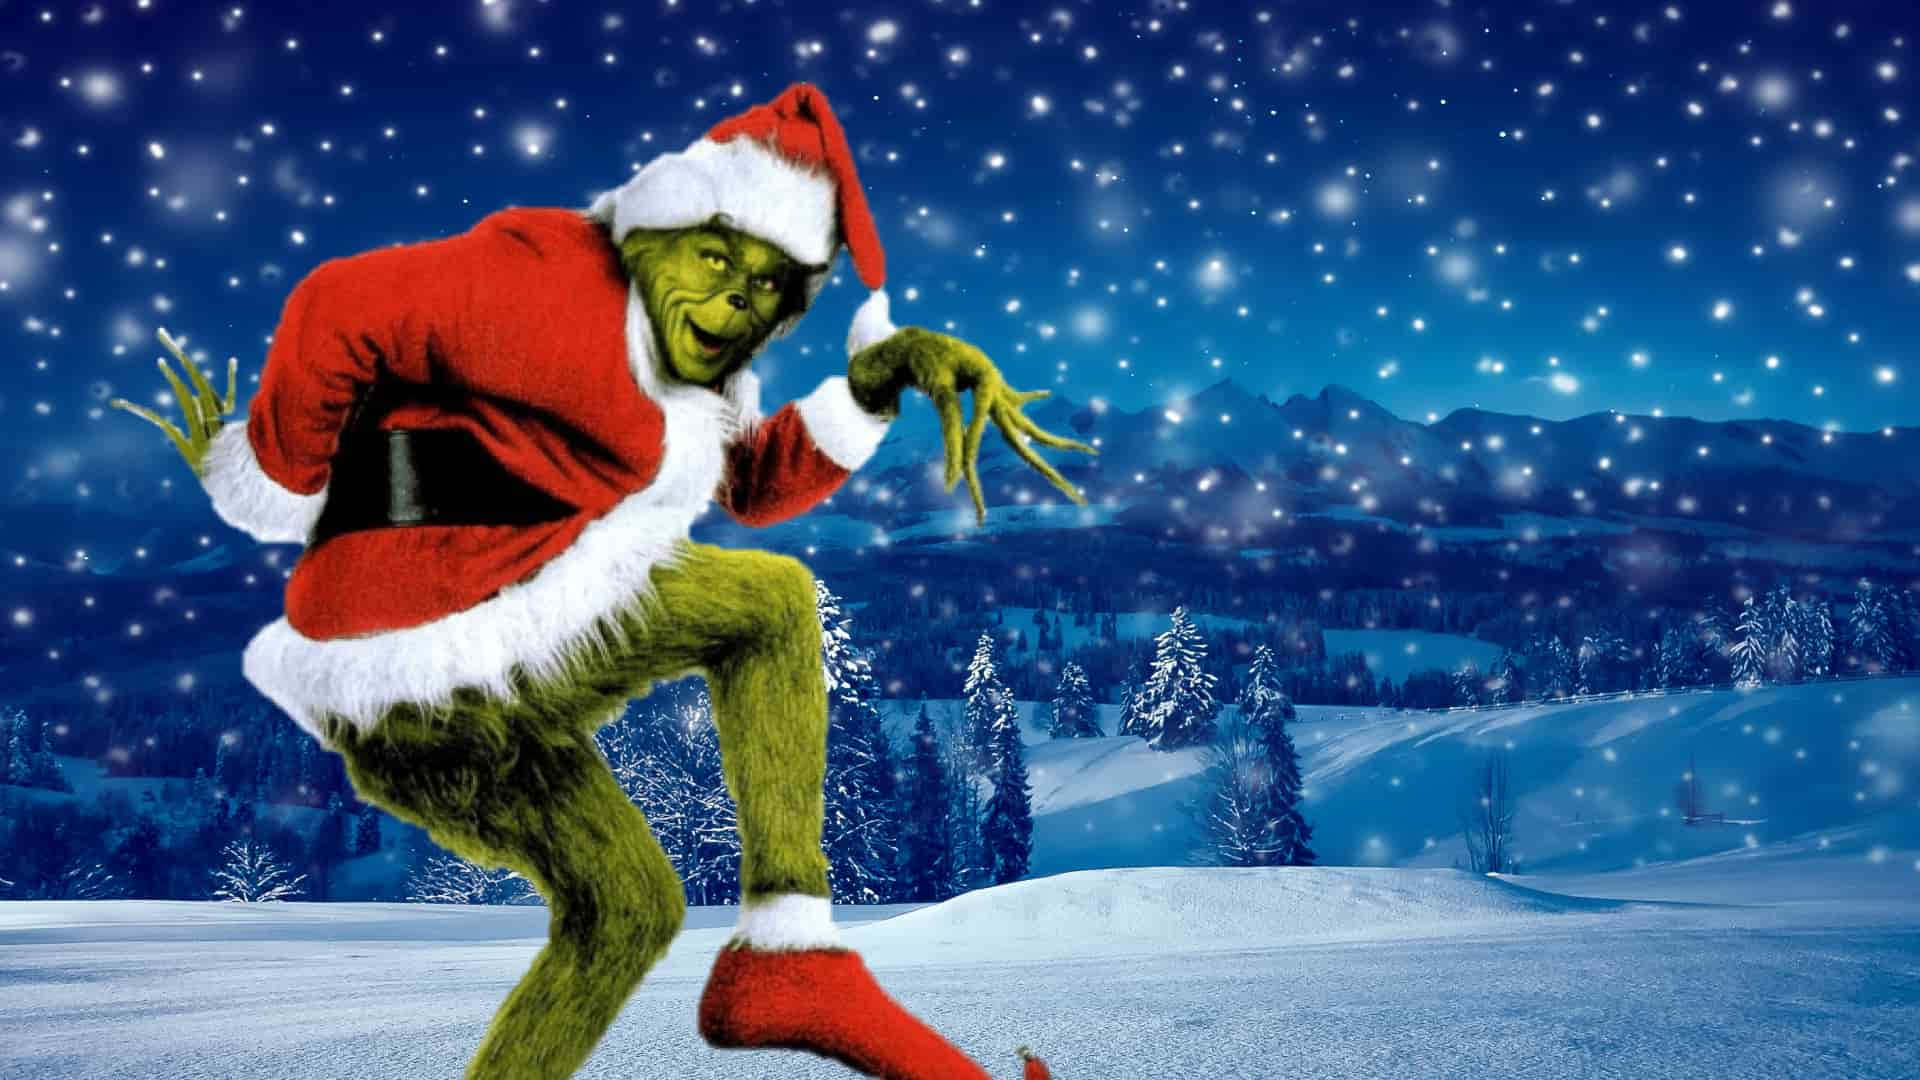 the grinch christmas wallpaper